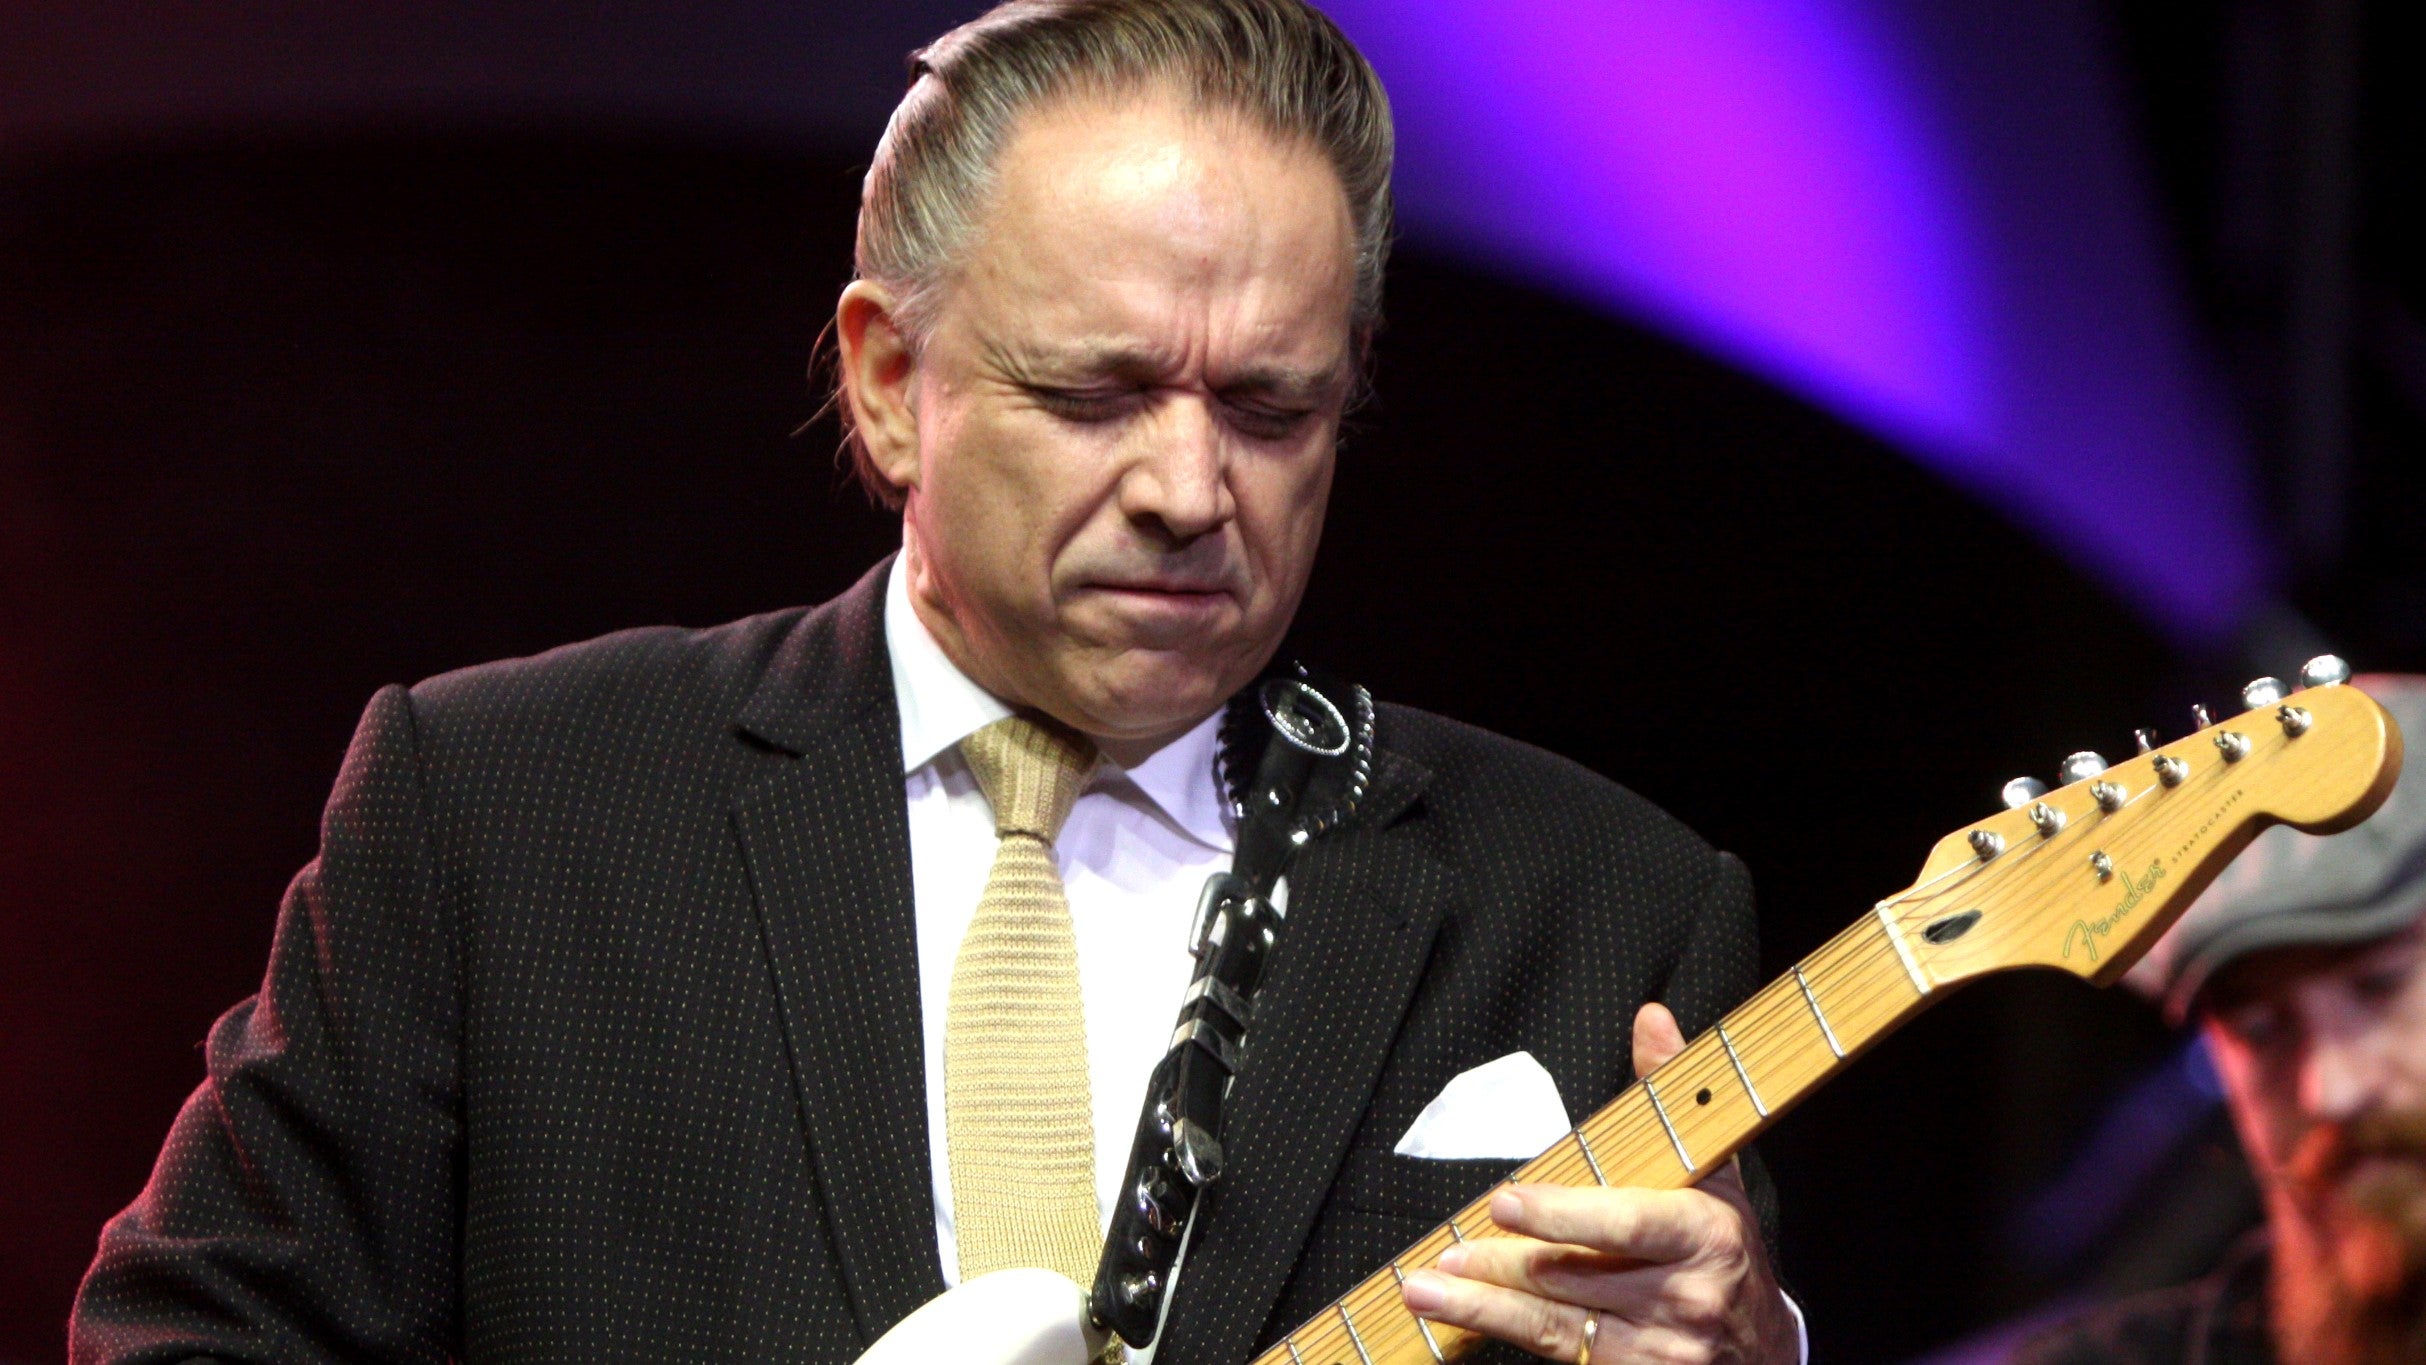 Jimmie Vaughan at The State Room